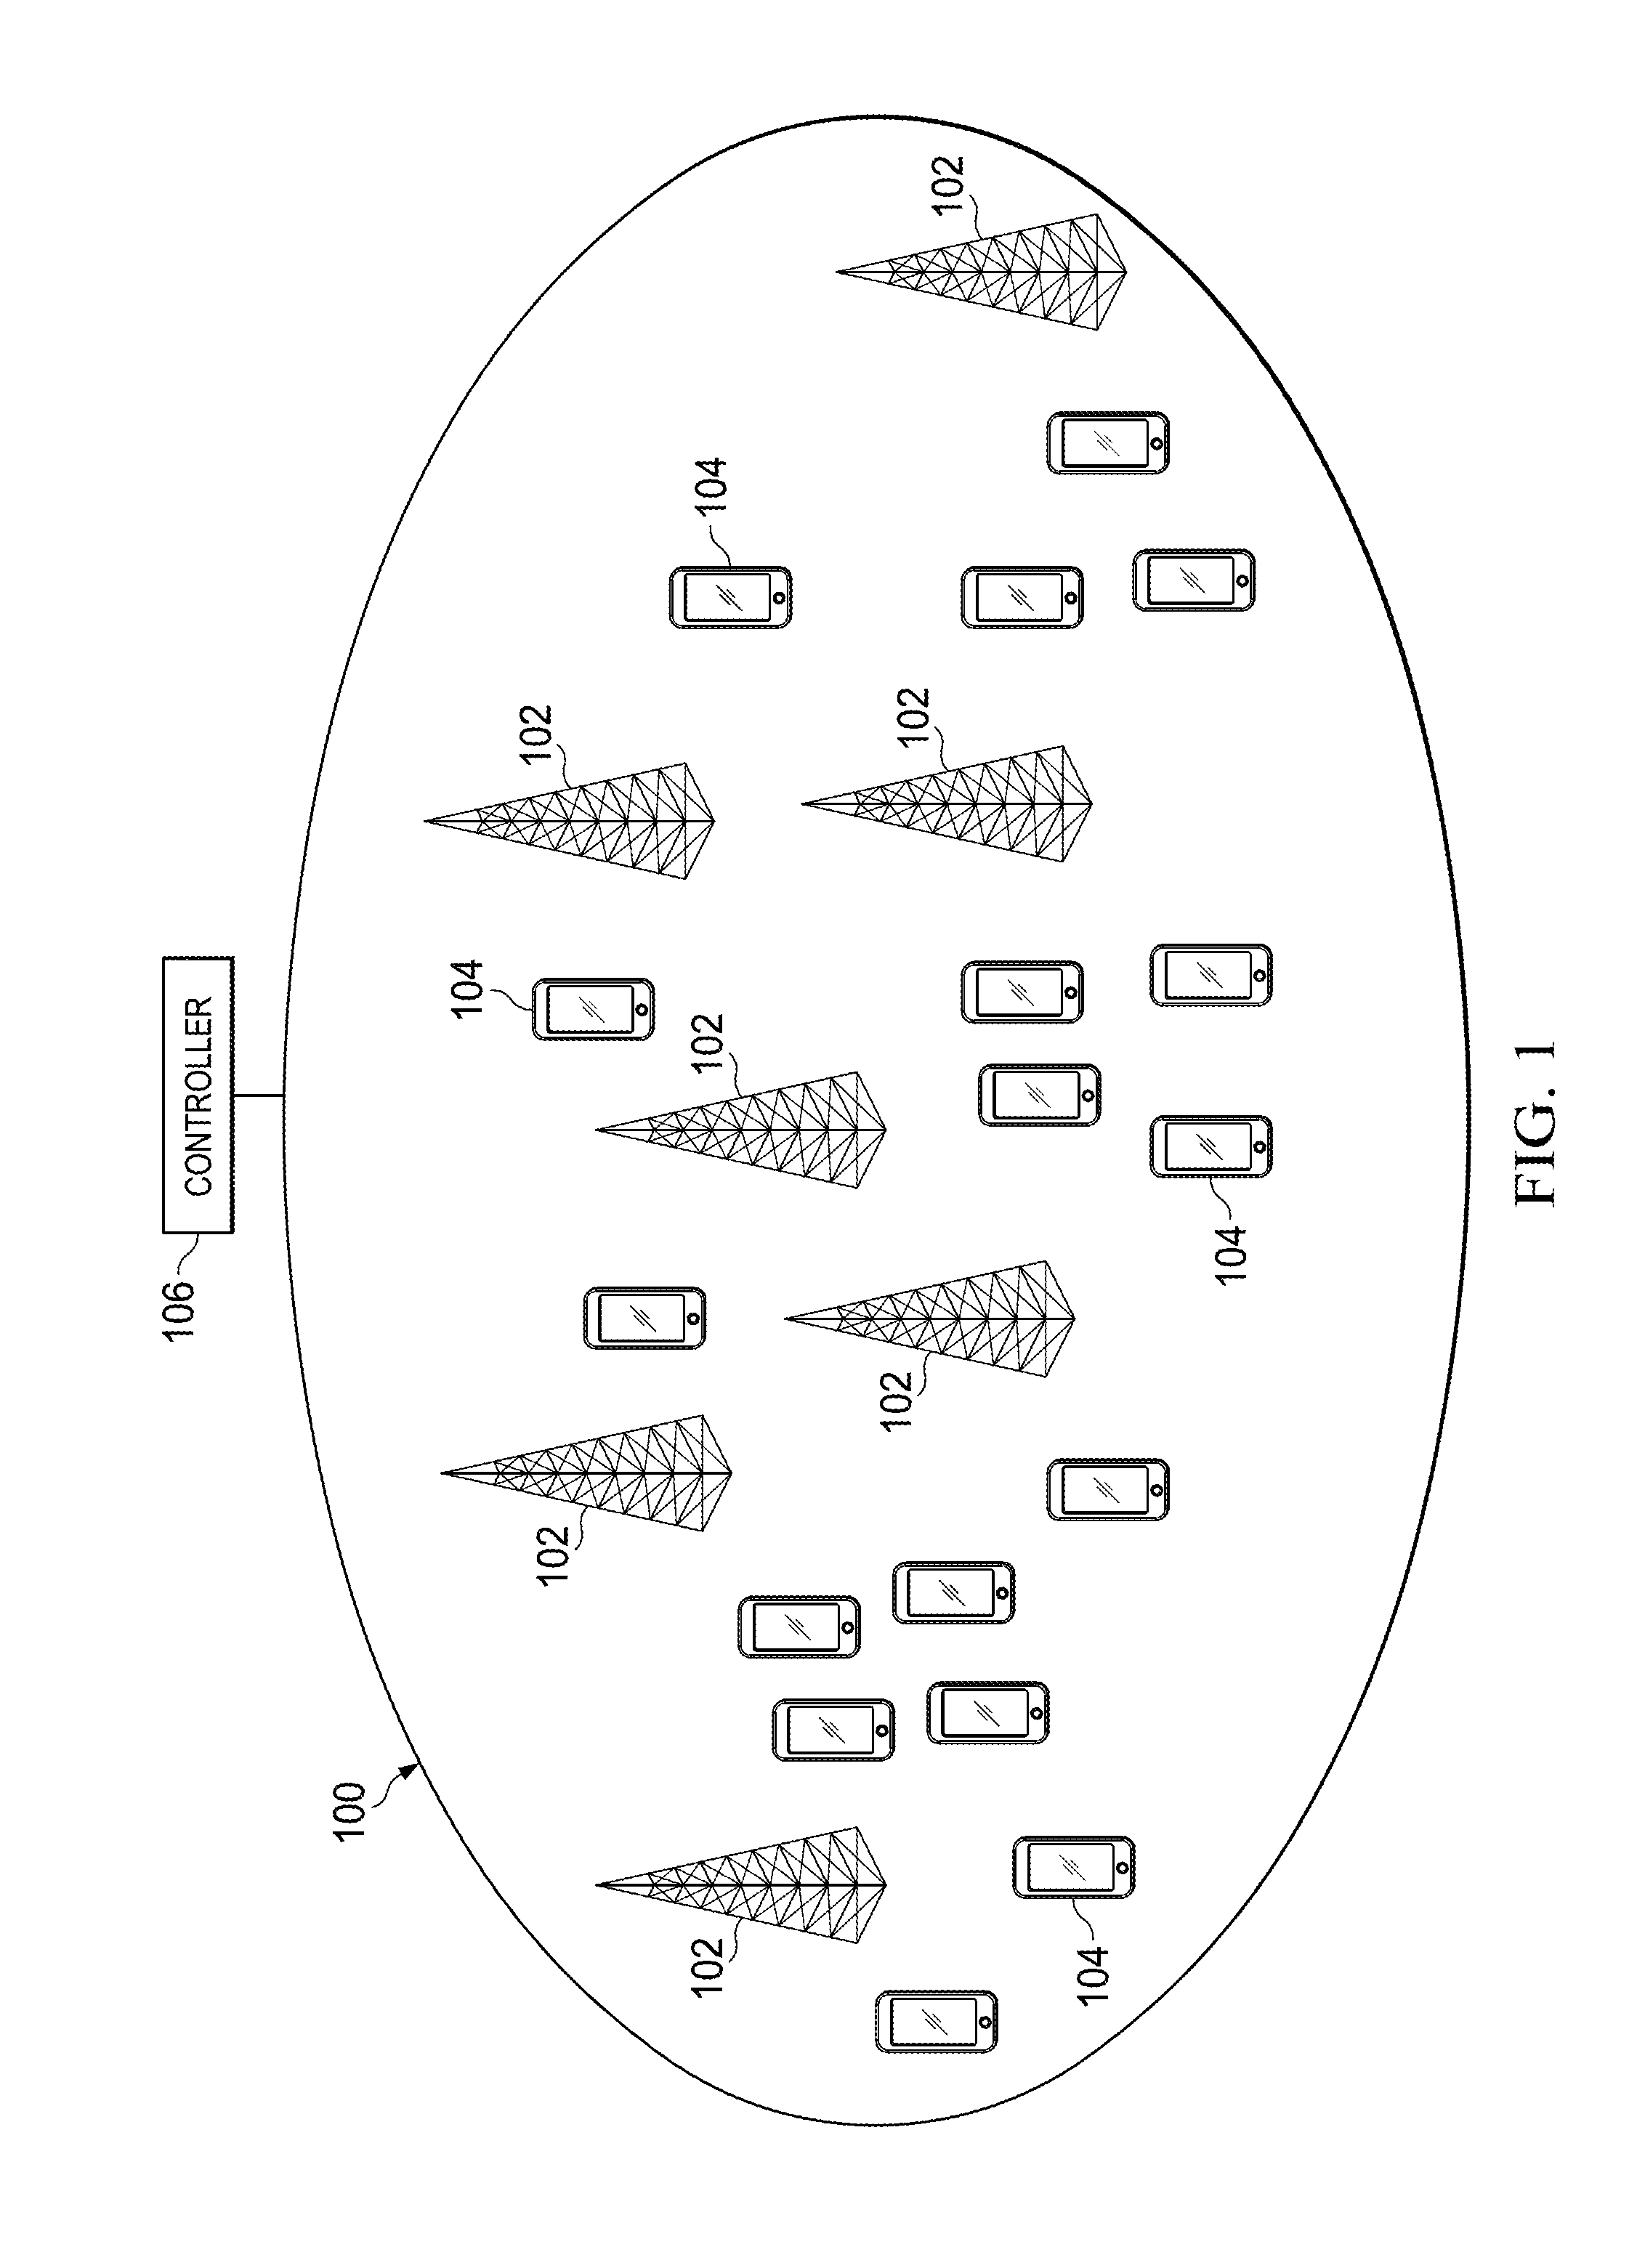 System and Method for Radio Access Virtualization